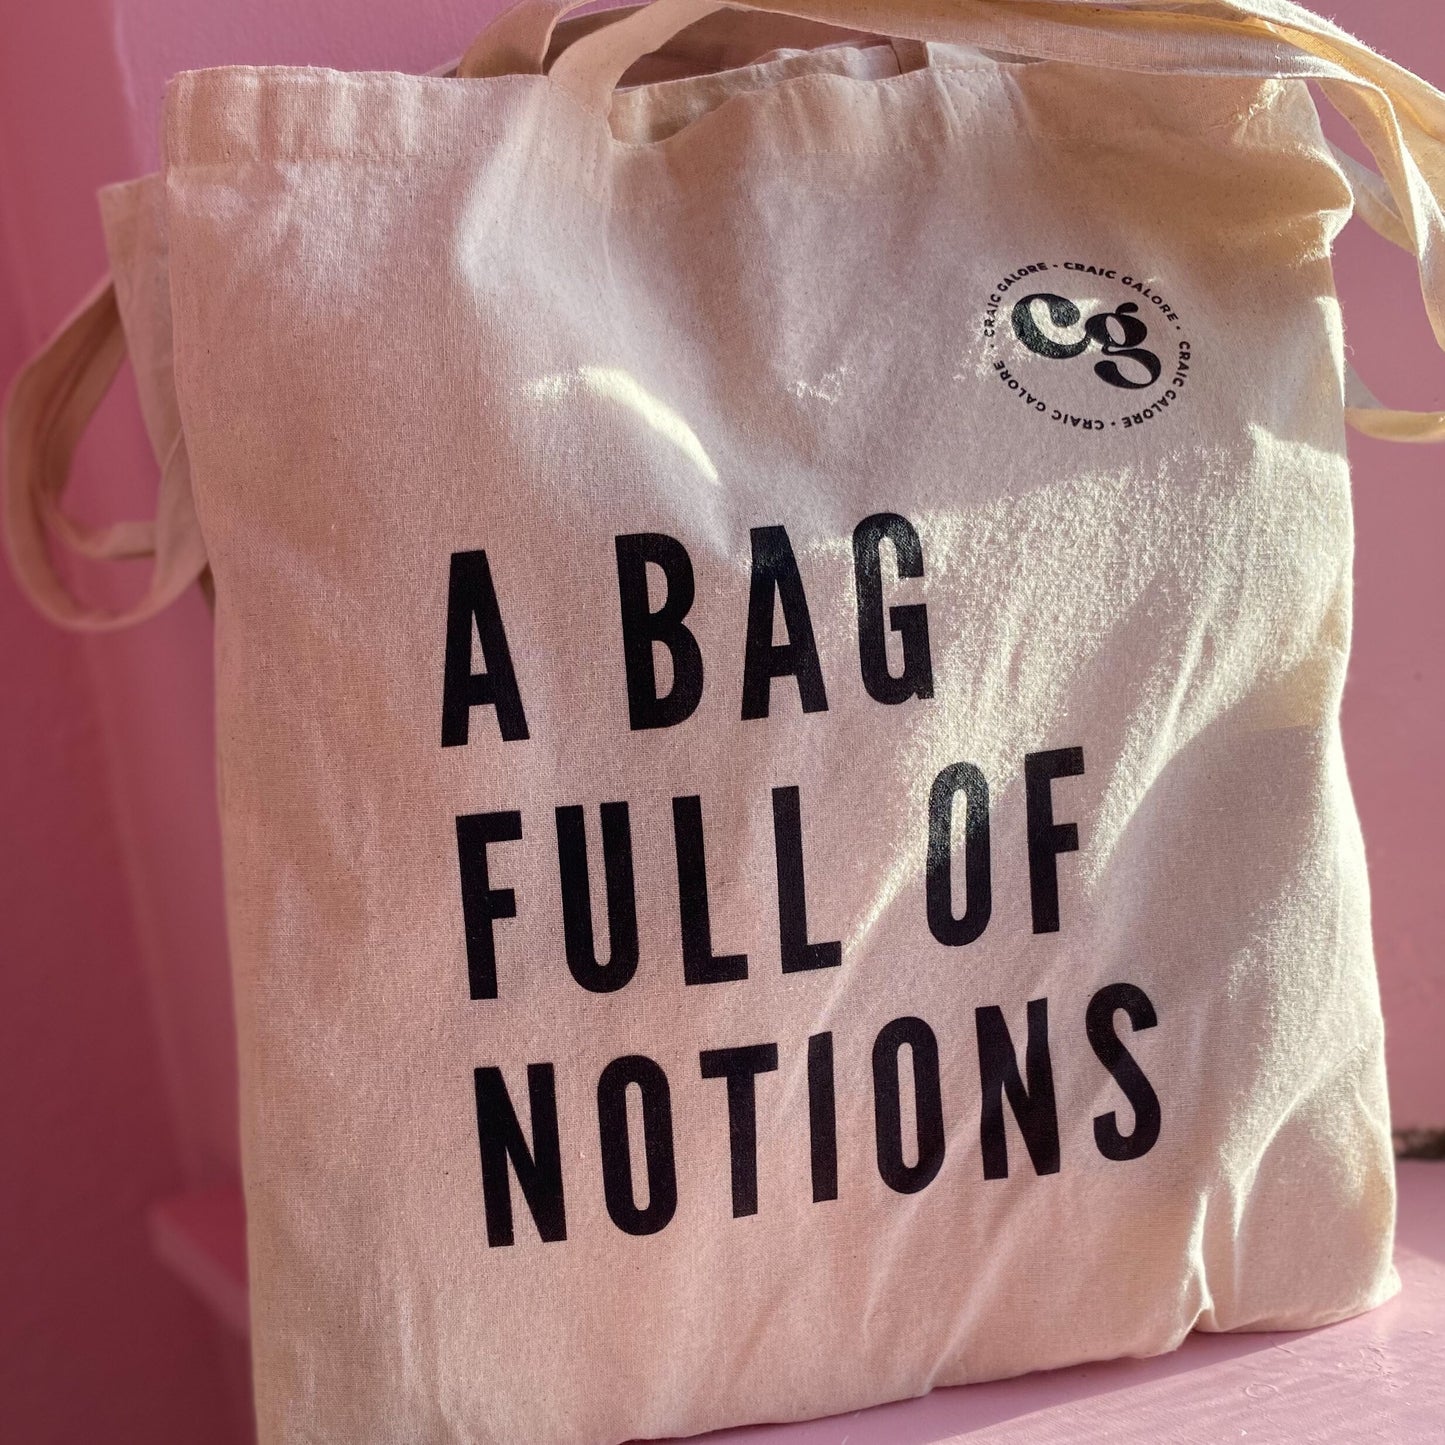 A bag full of notions